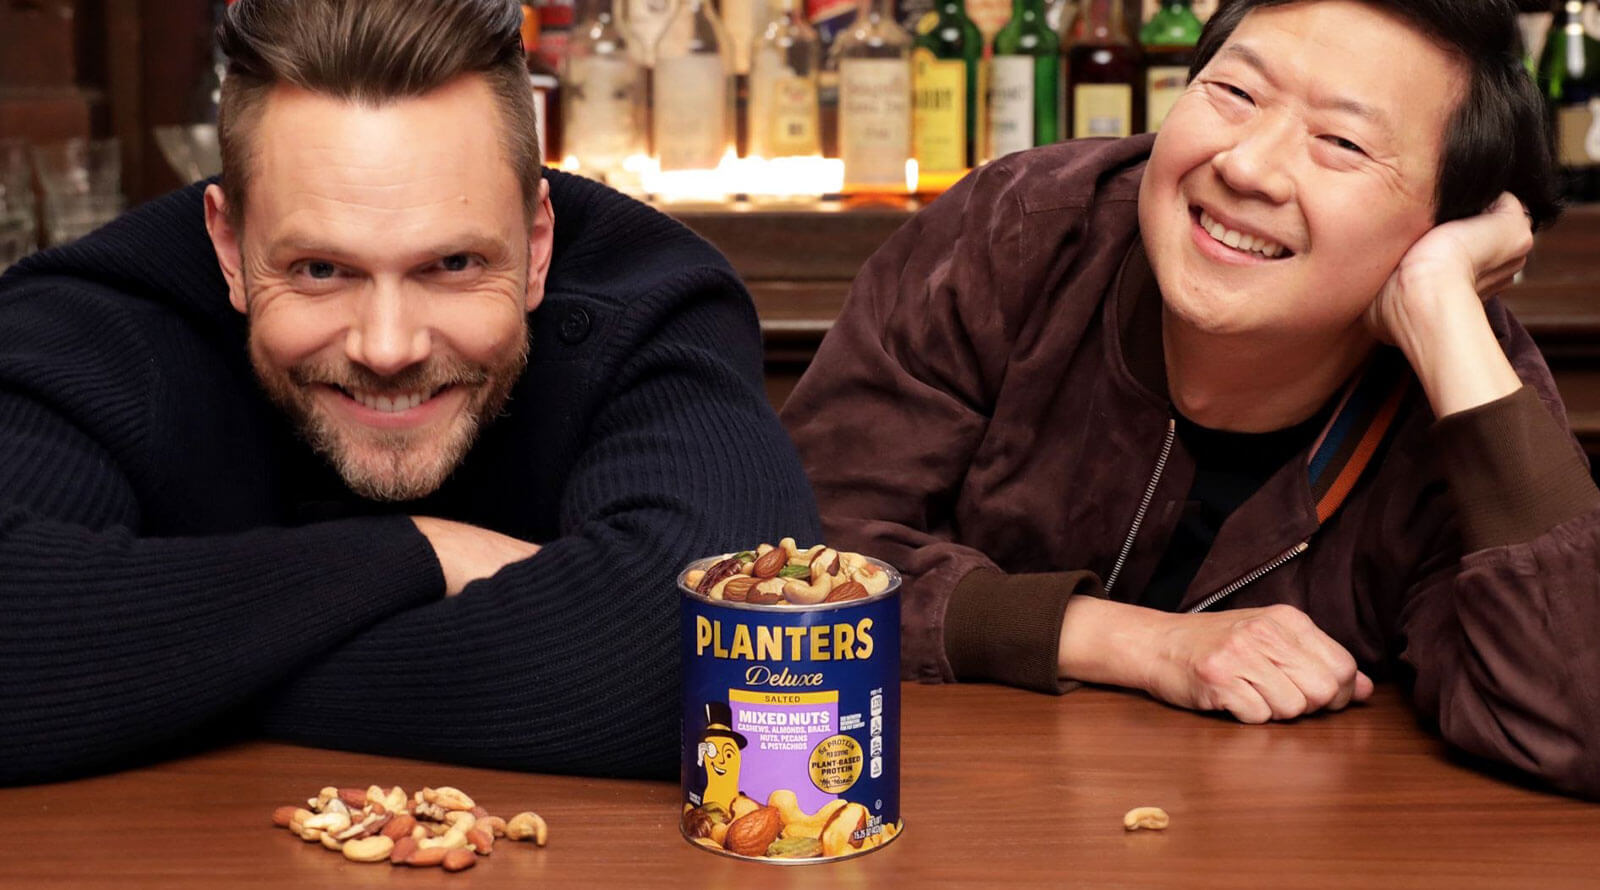 Joel McHale and Ken Jeong leaning on a wooden table with a can of Planters Mixed Nuts on it